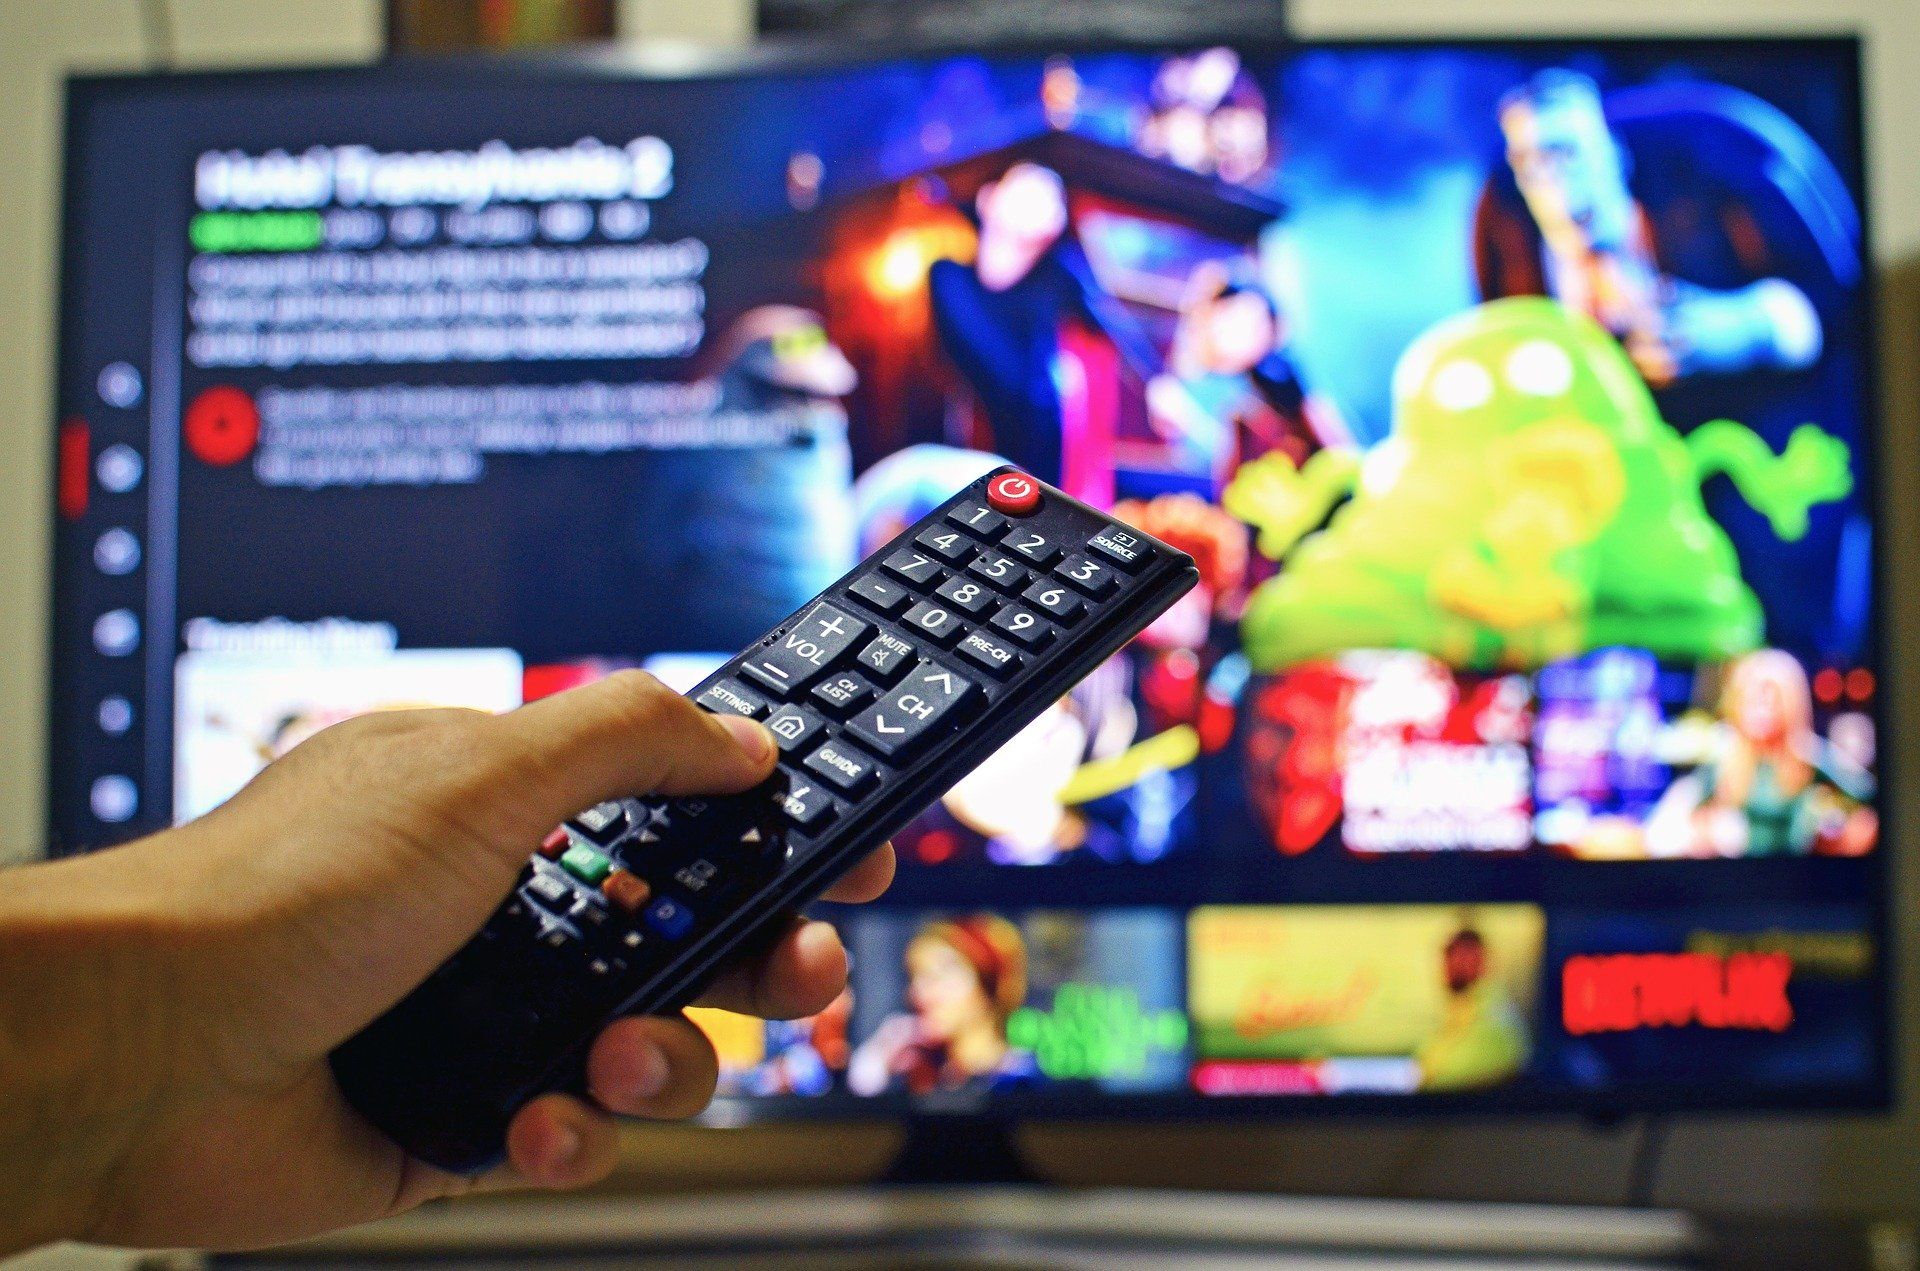 TV and hand holding a remote control